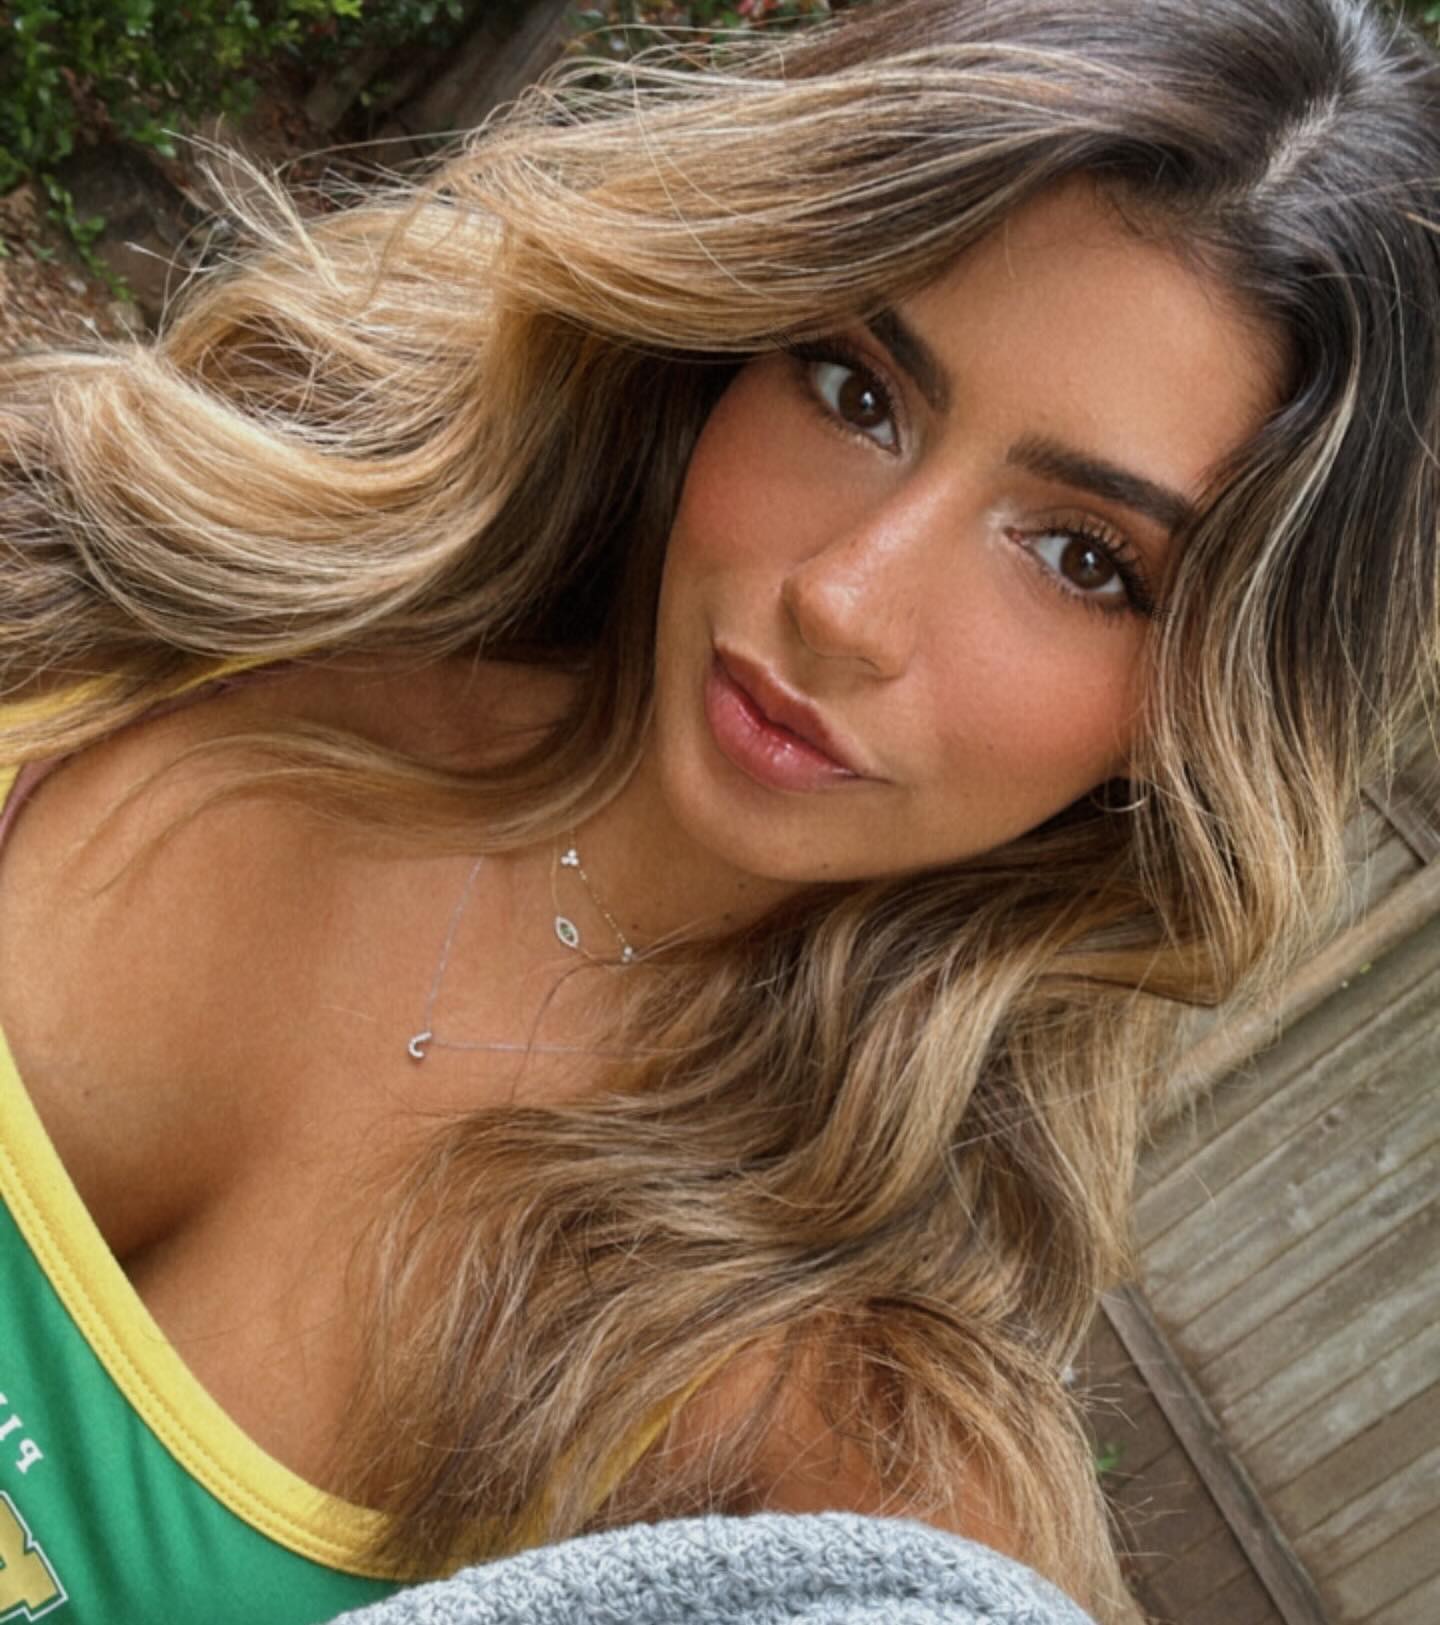 Happy Easter 🐣 💚 What movie are we seeing?

#easter #love #brasil #streamer #godzillaxkong #latina